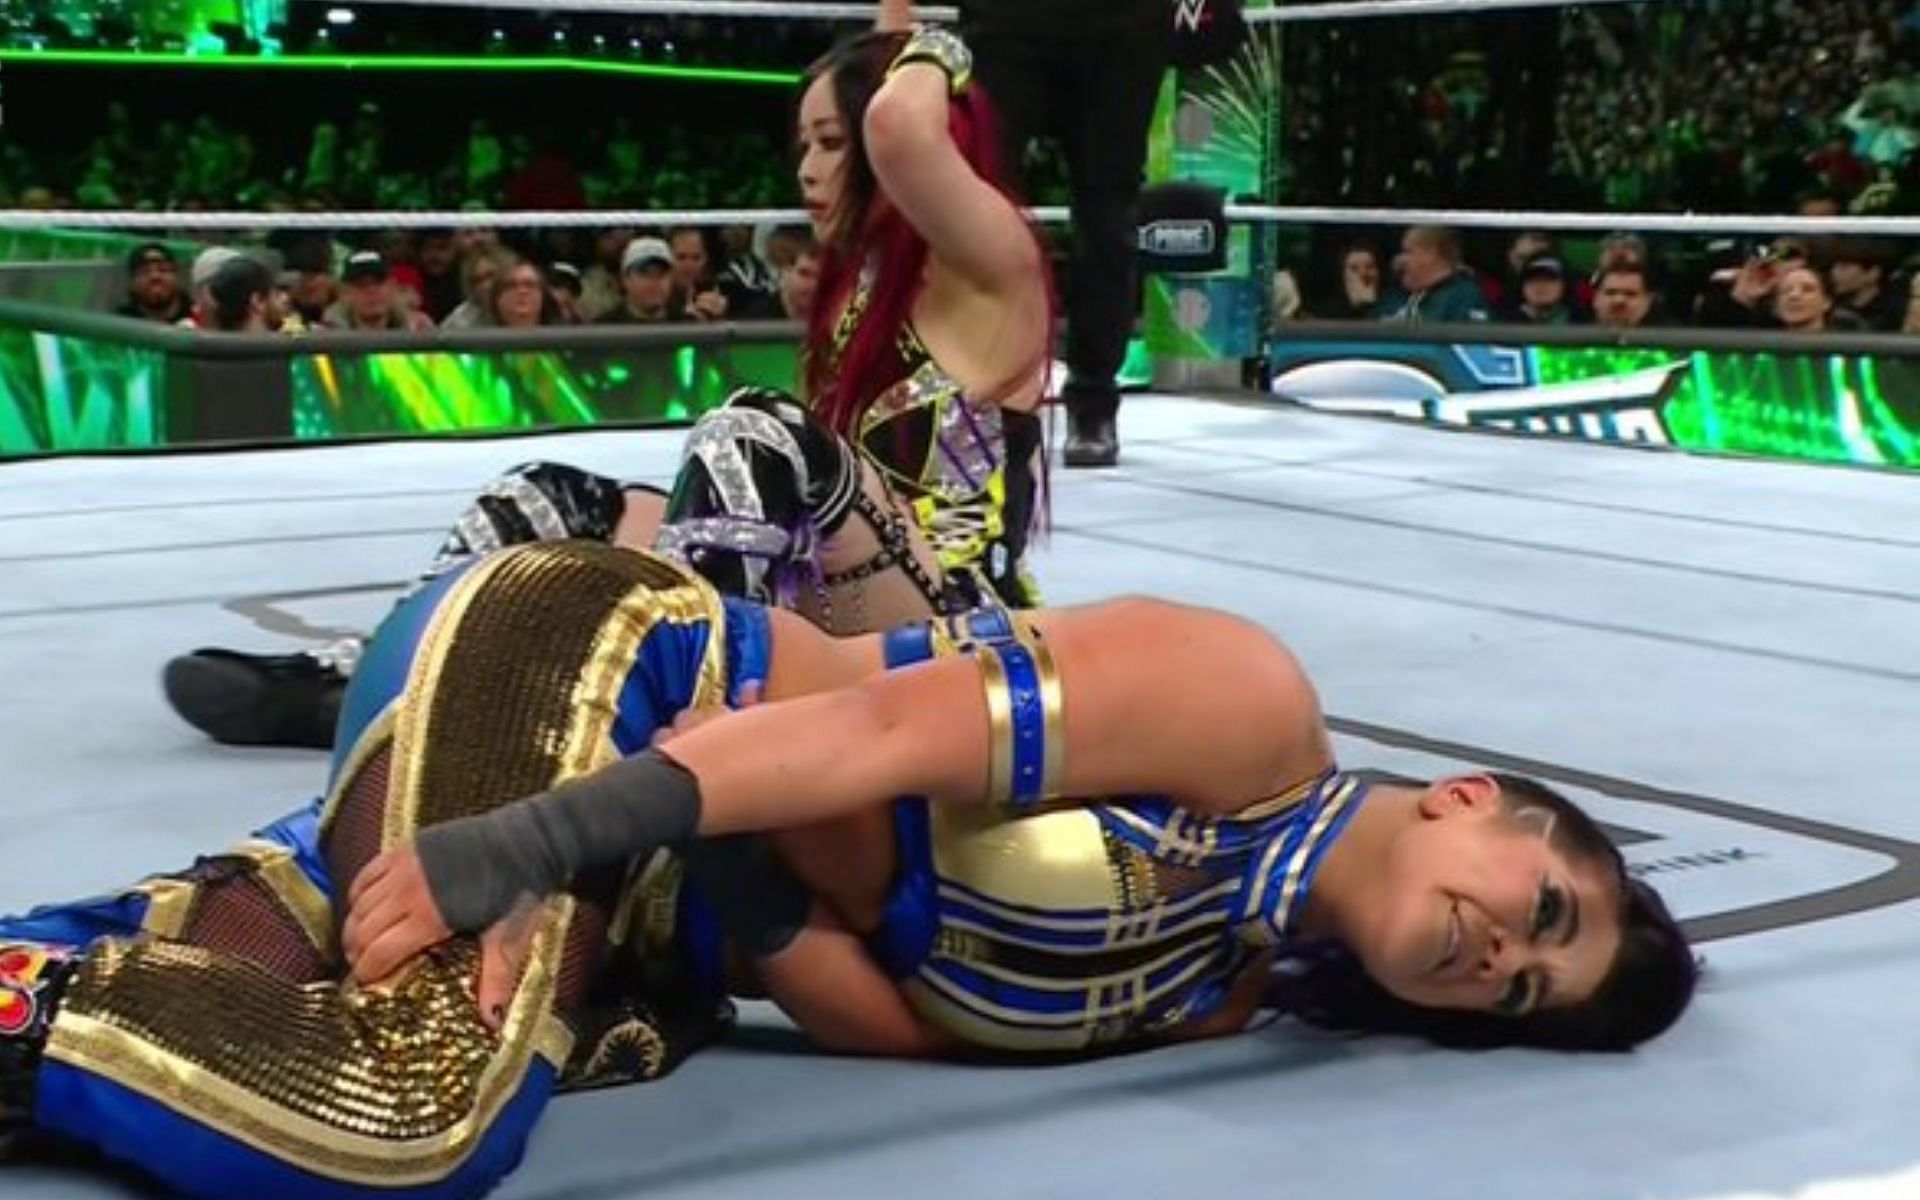 Incredible conclusion to IYO SKY vs. Bayley Women's Title match at WrestleMania 40